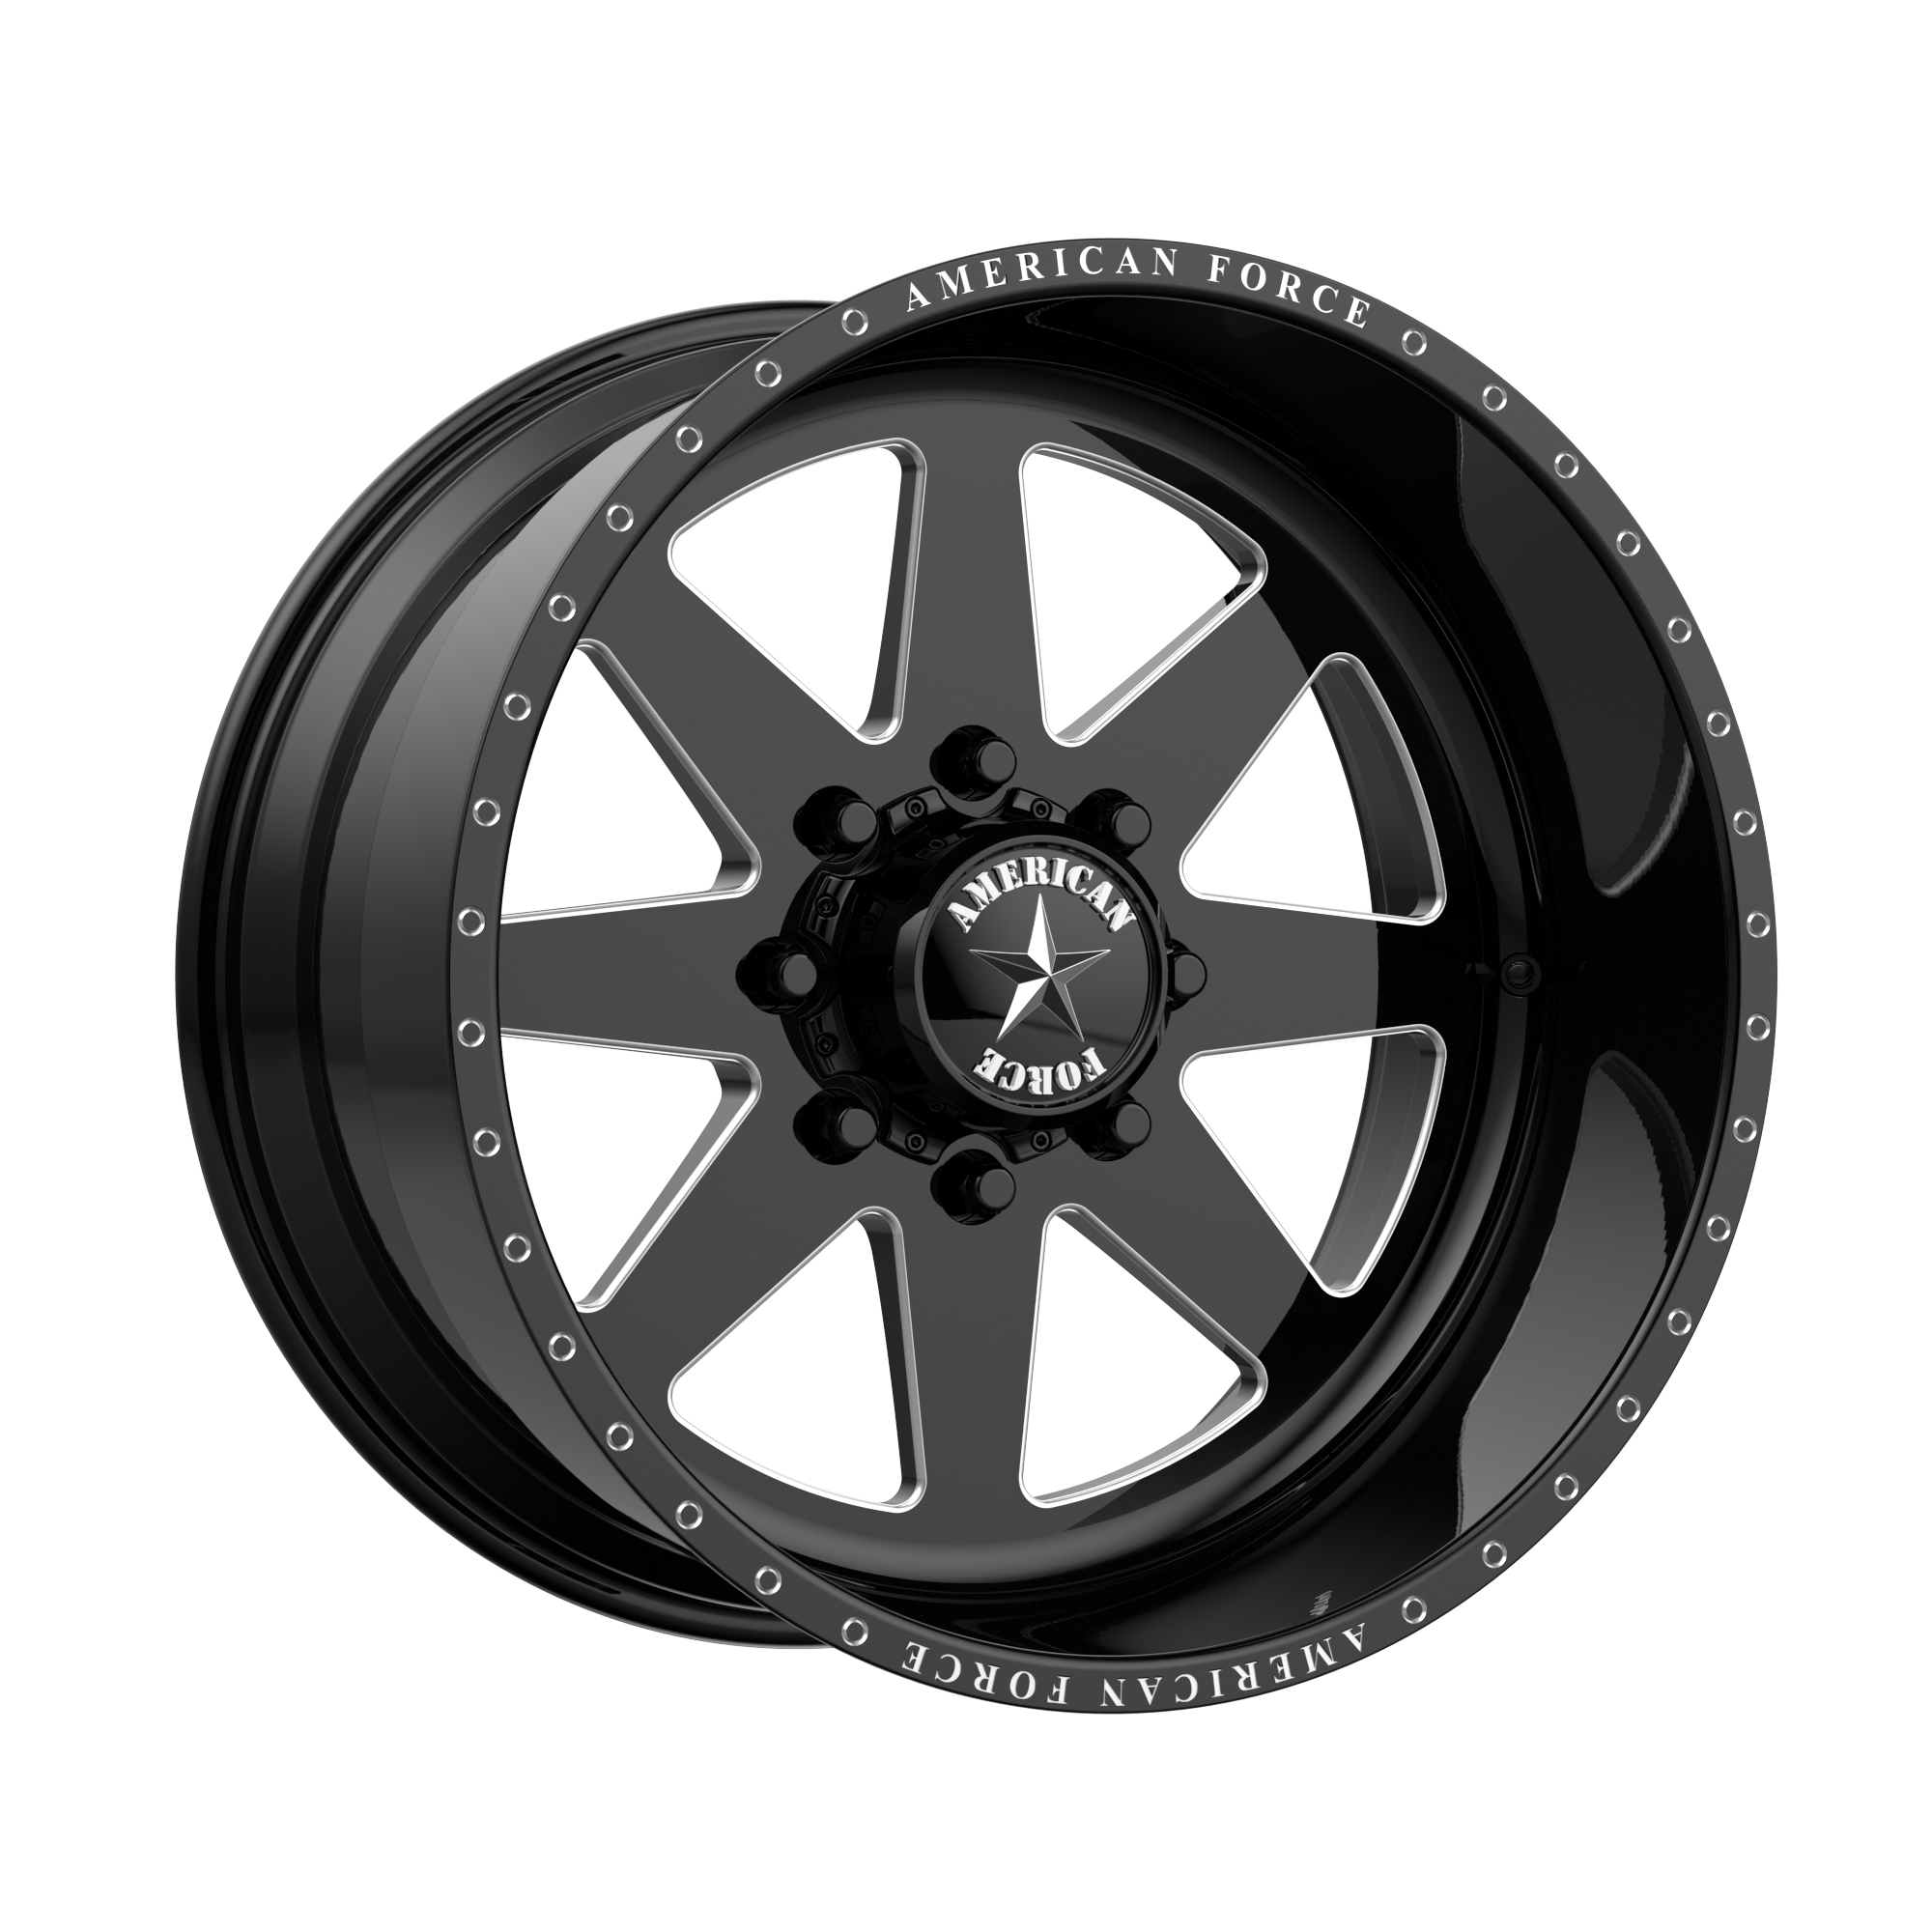 INDEPENDENCE SS 20x10 6x139.70 GLOSS BLACK MACHINED (-25 mm) - Tires and Engine Performance